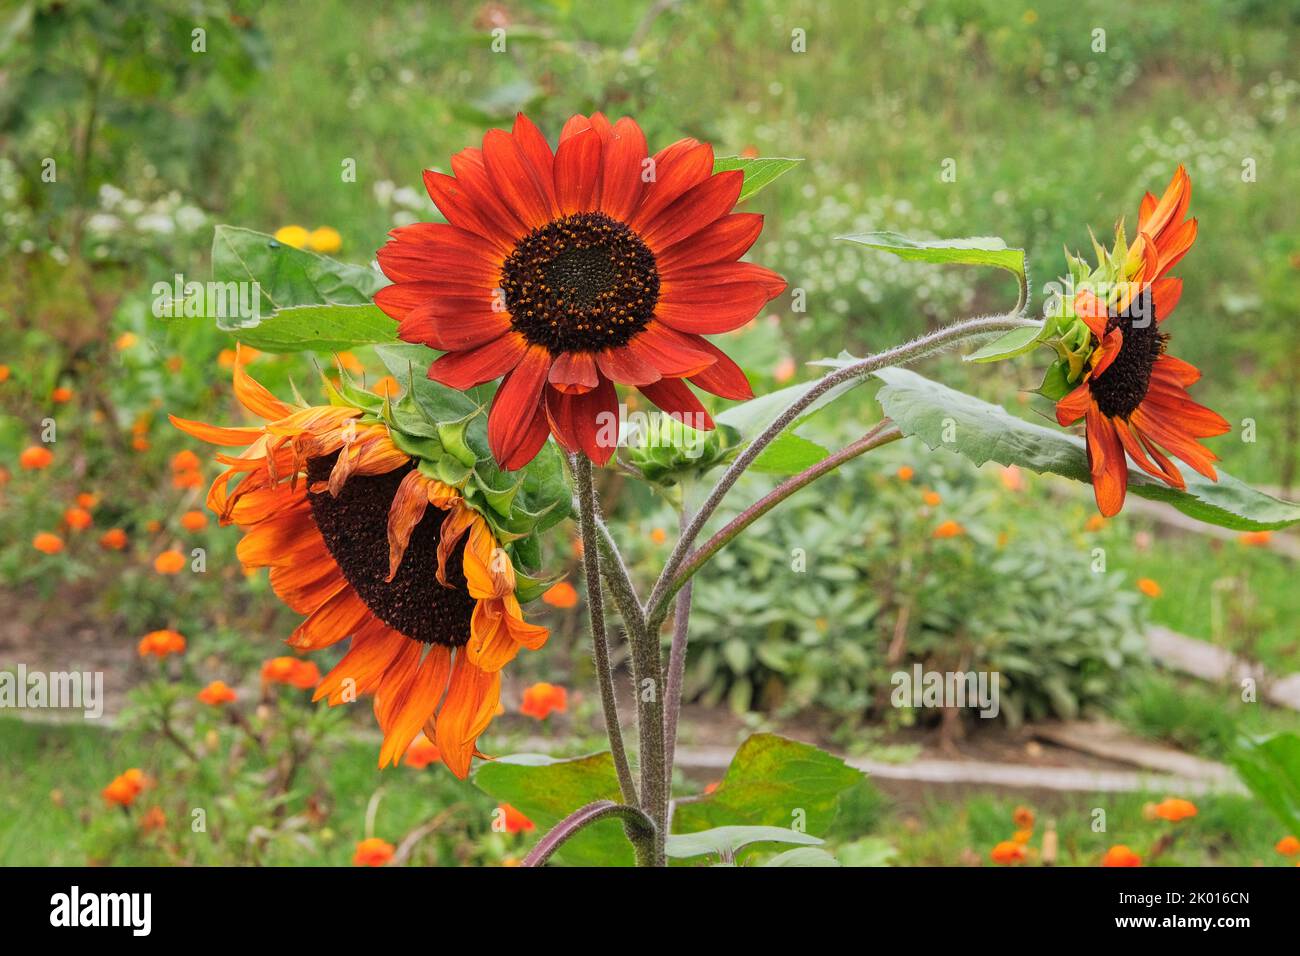 Decorative flowers. Sunflowers is growing in rural garden. Open ground flat bed into the garden. Farming background. Stock Photo